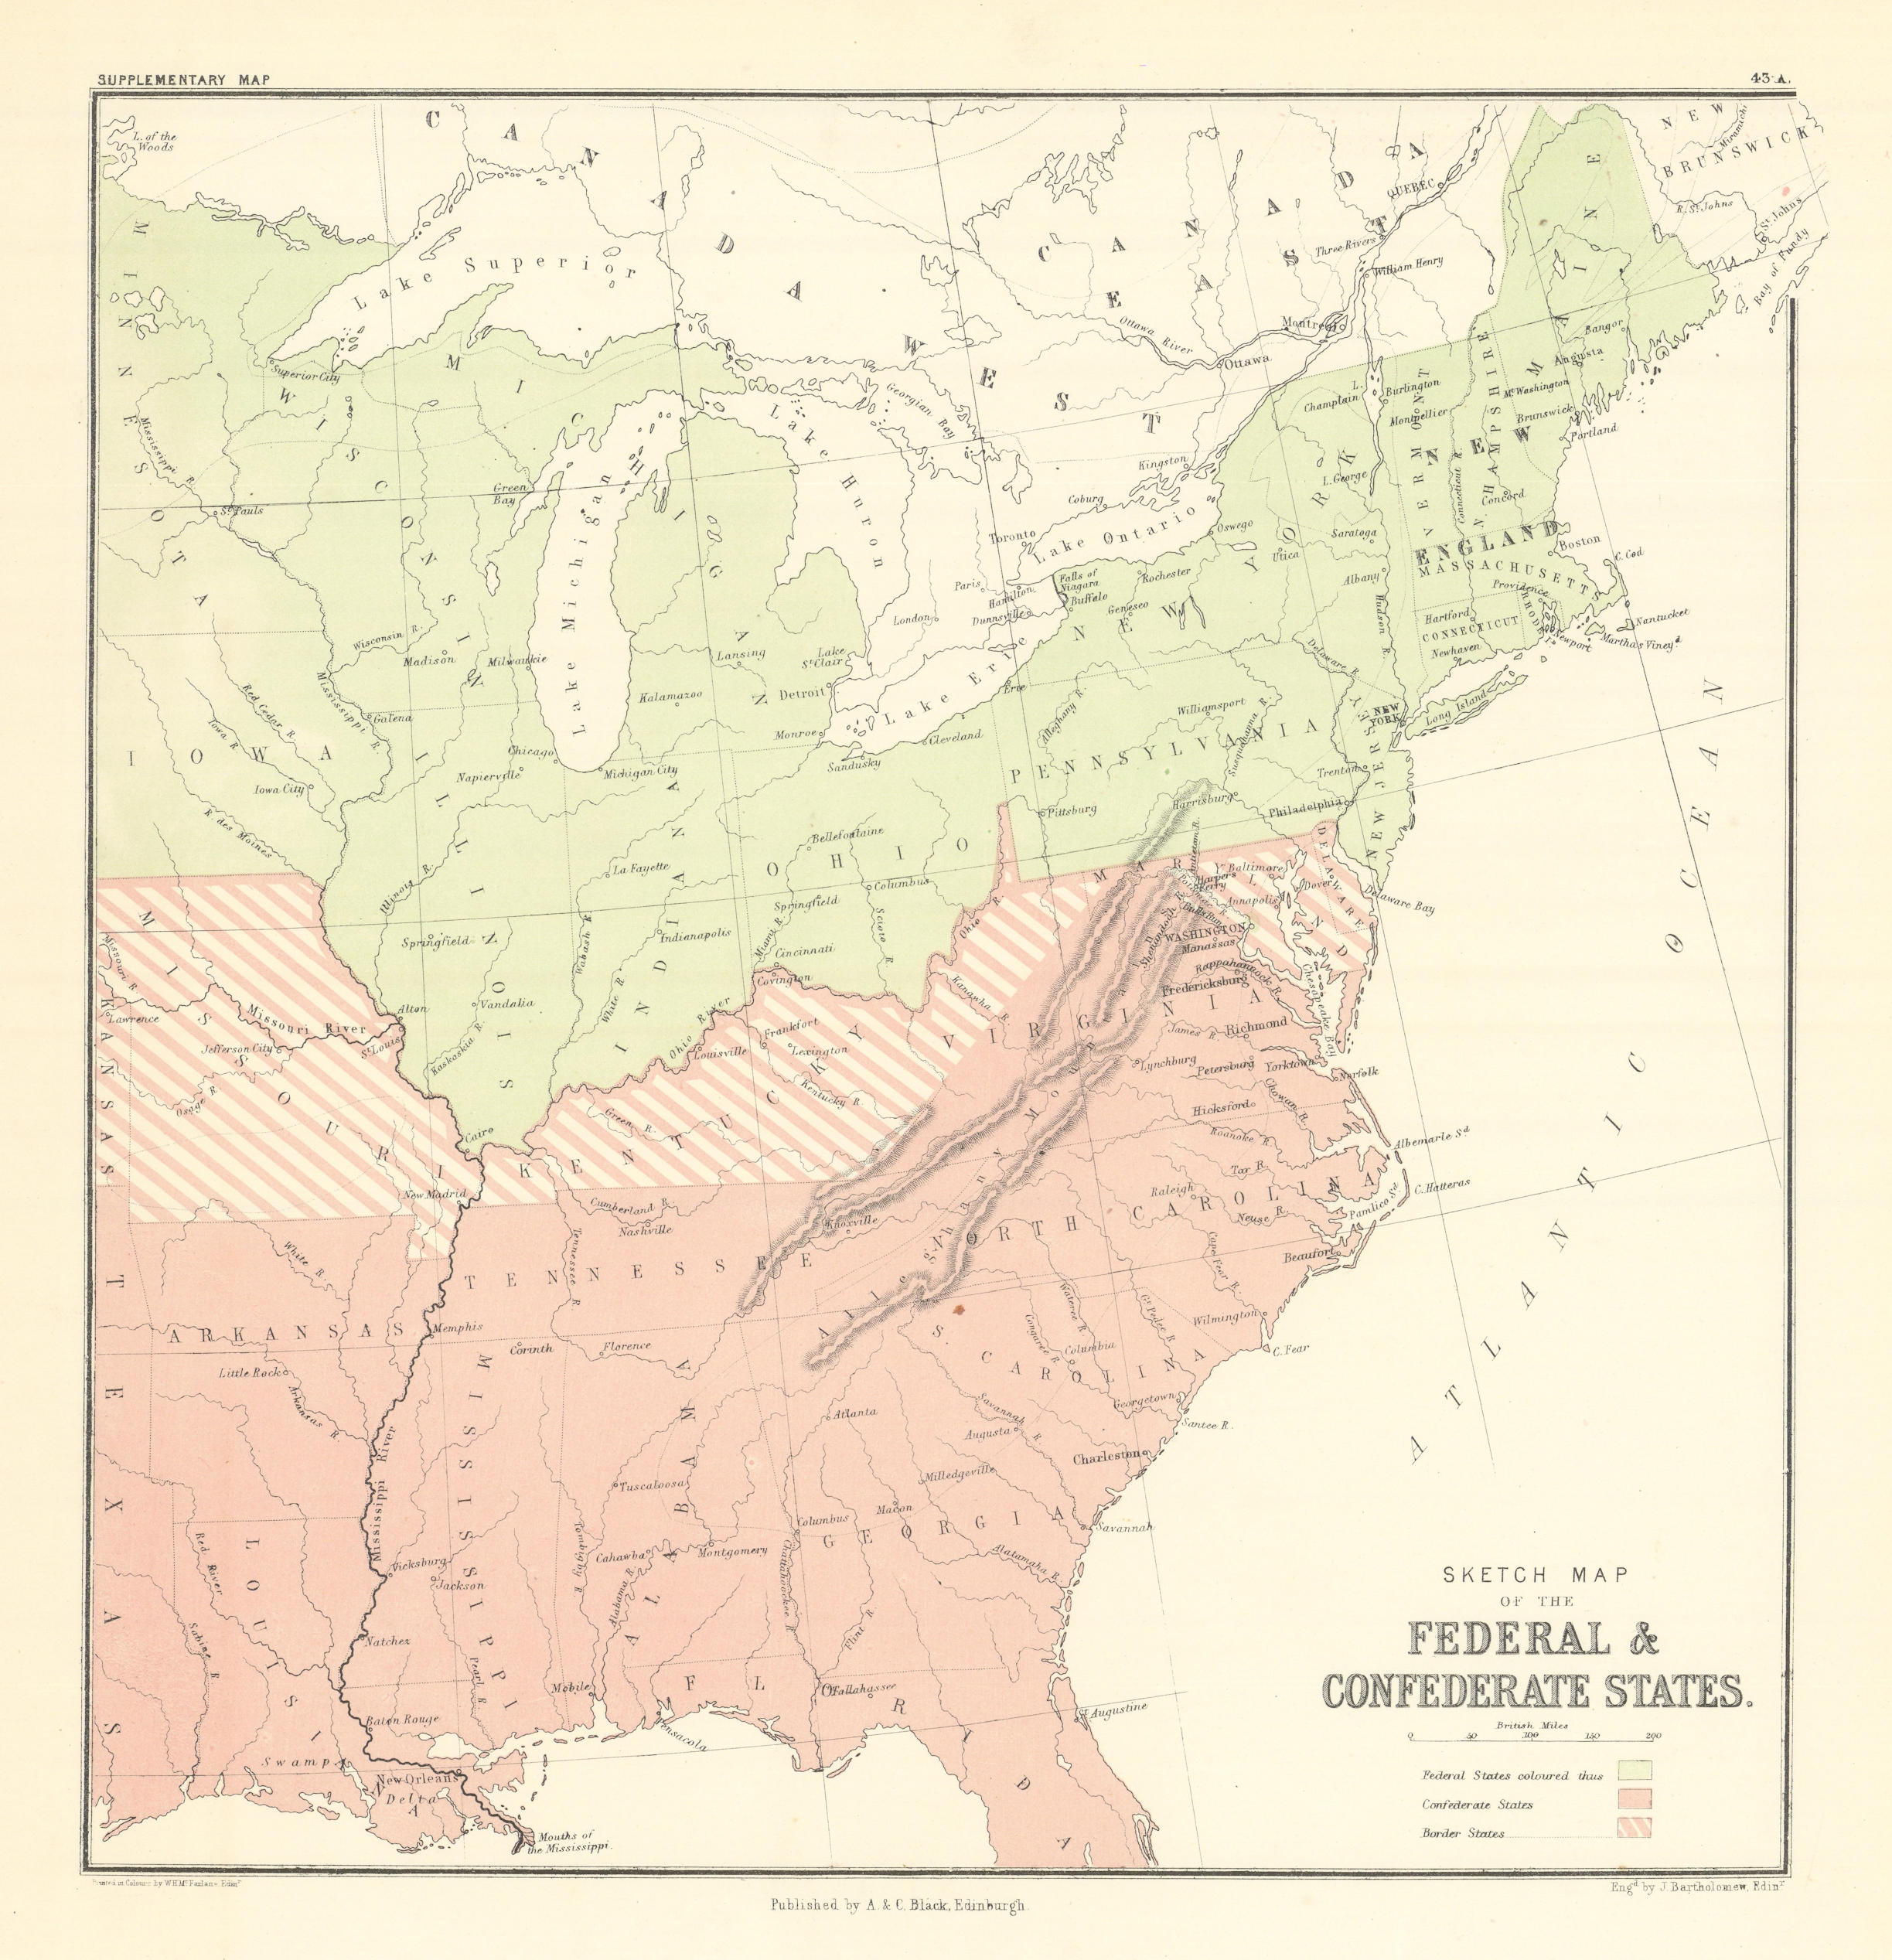 Associate Product US Civil War. Sketch Map of the Federal & Confederate States. BARTHOLOMEW 1862